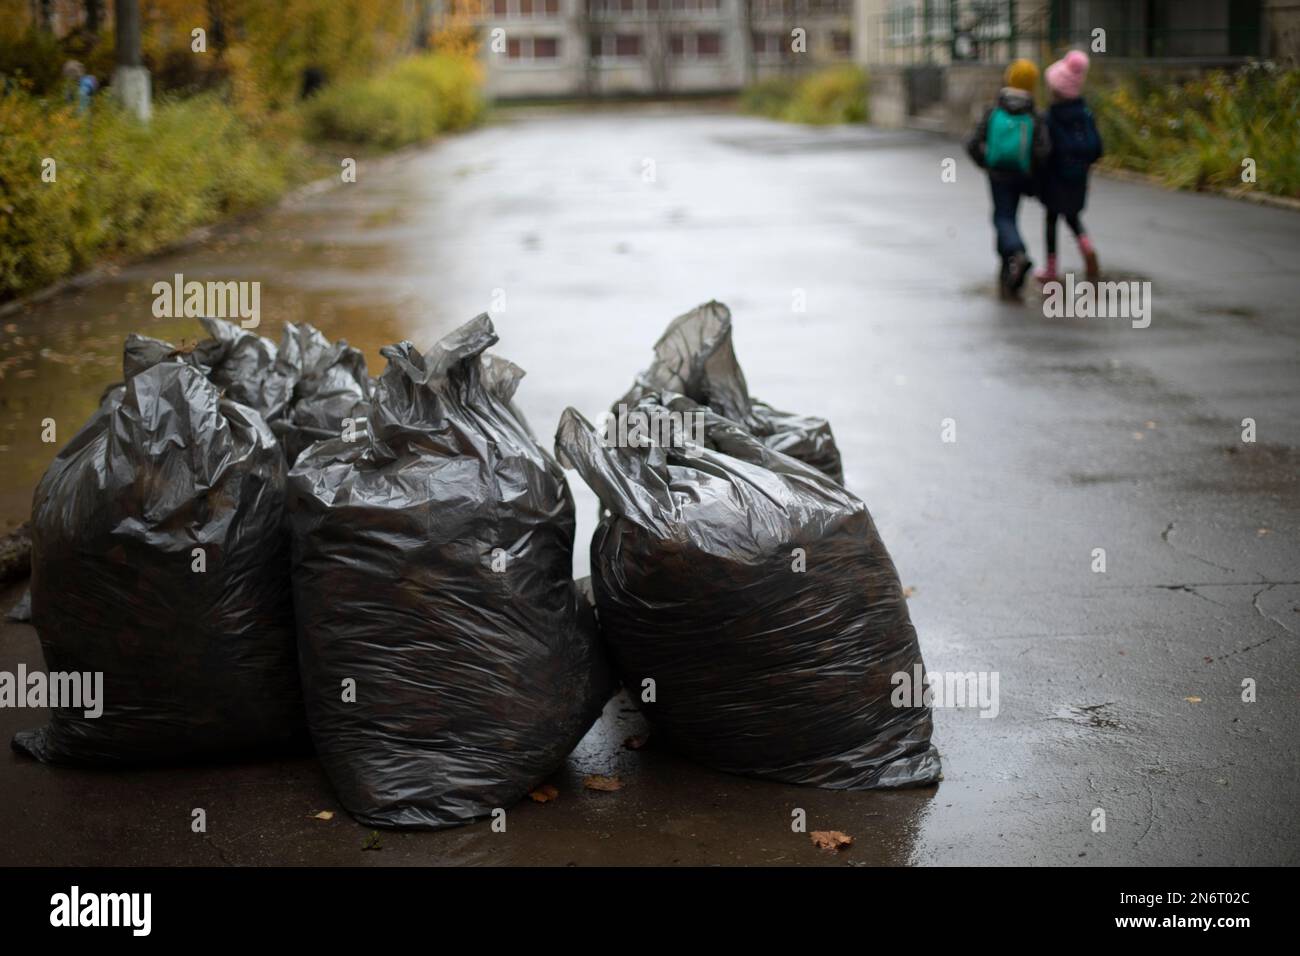 Garbage. Plastic black bags. Cleaning area. Order in yard in autumn. Stock Photo